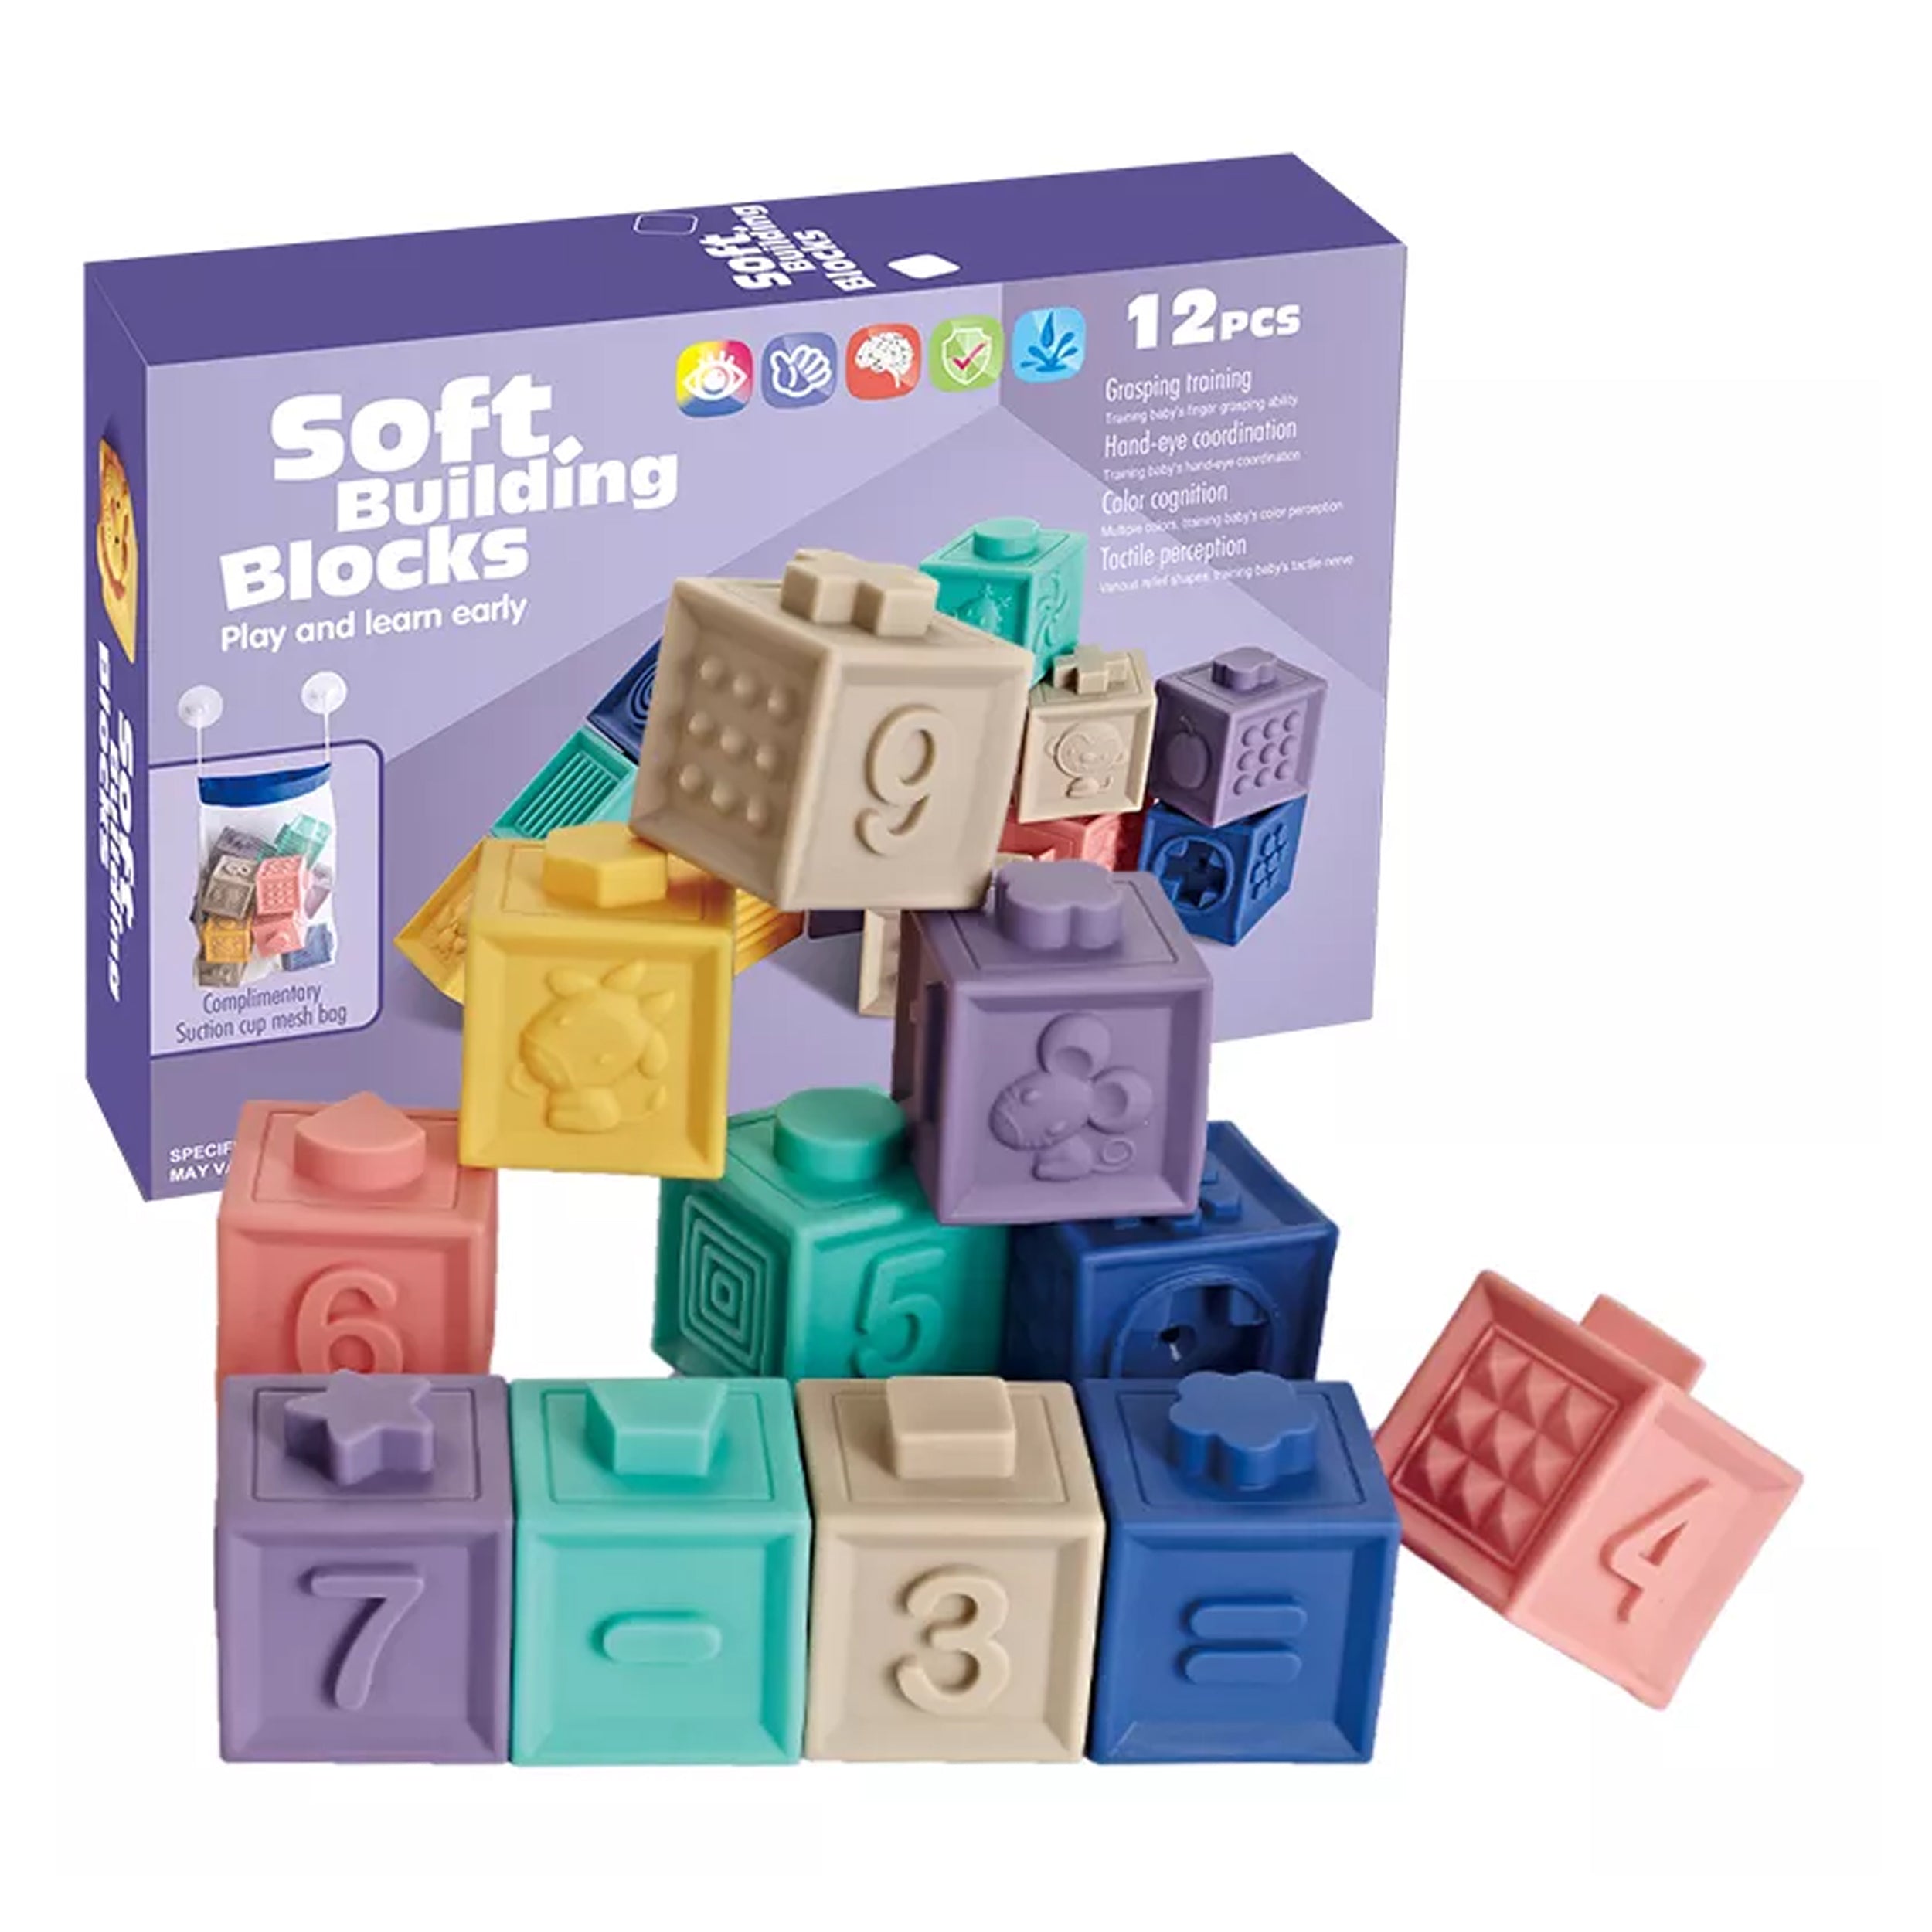 Animal Soft Stacking Block Set Baby Early Learning Toy - Fun and Educational Toys for Infants and Toddlers